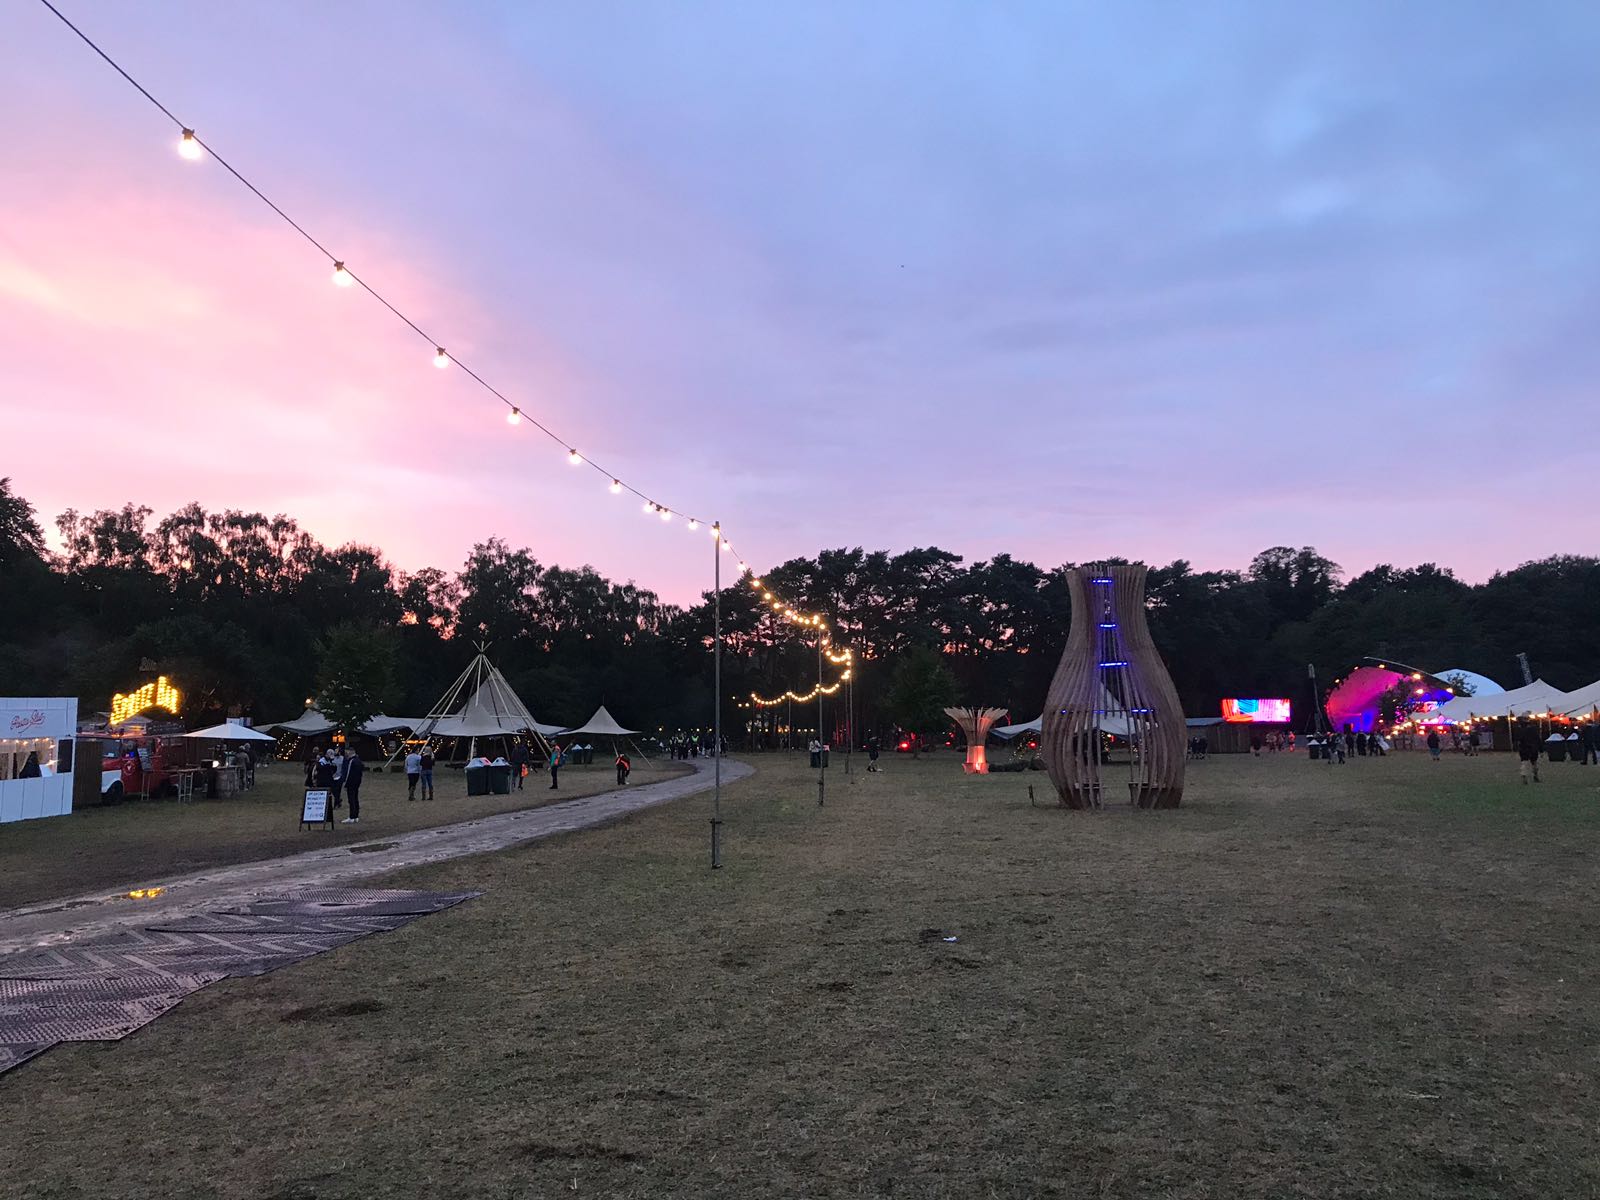 The sun rises over the entrance to the Houghton Festival arena. Image: Tom Jenkins